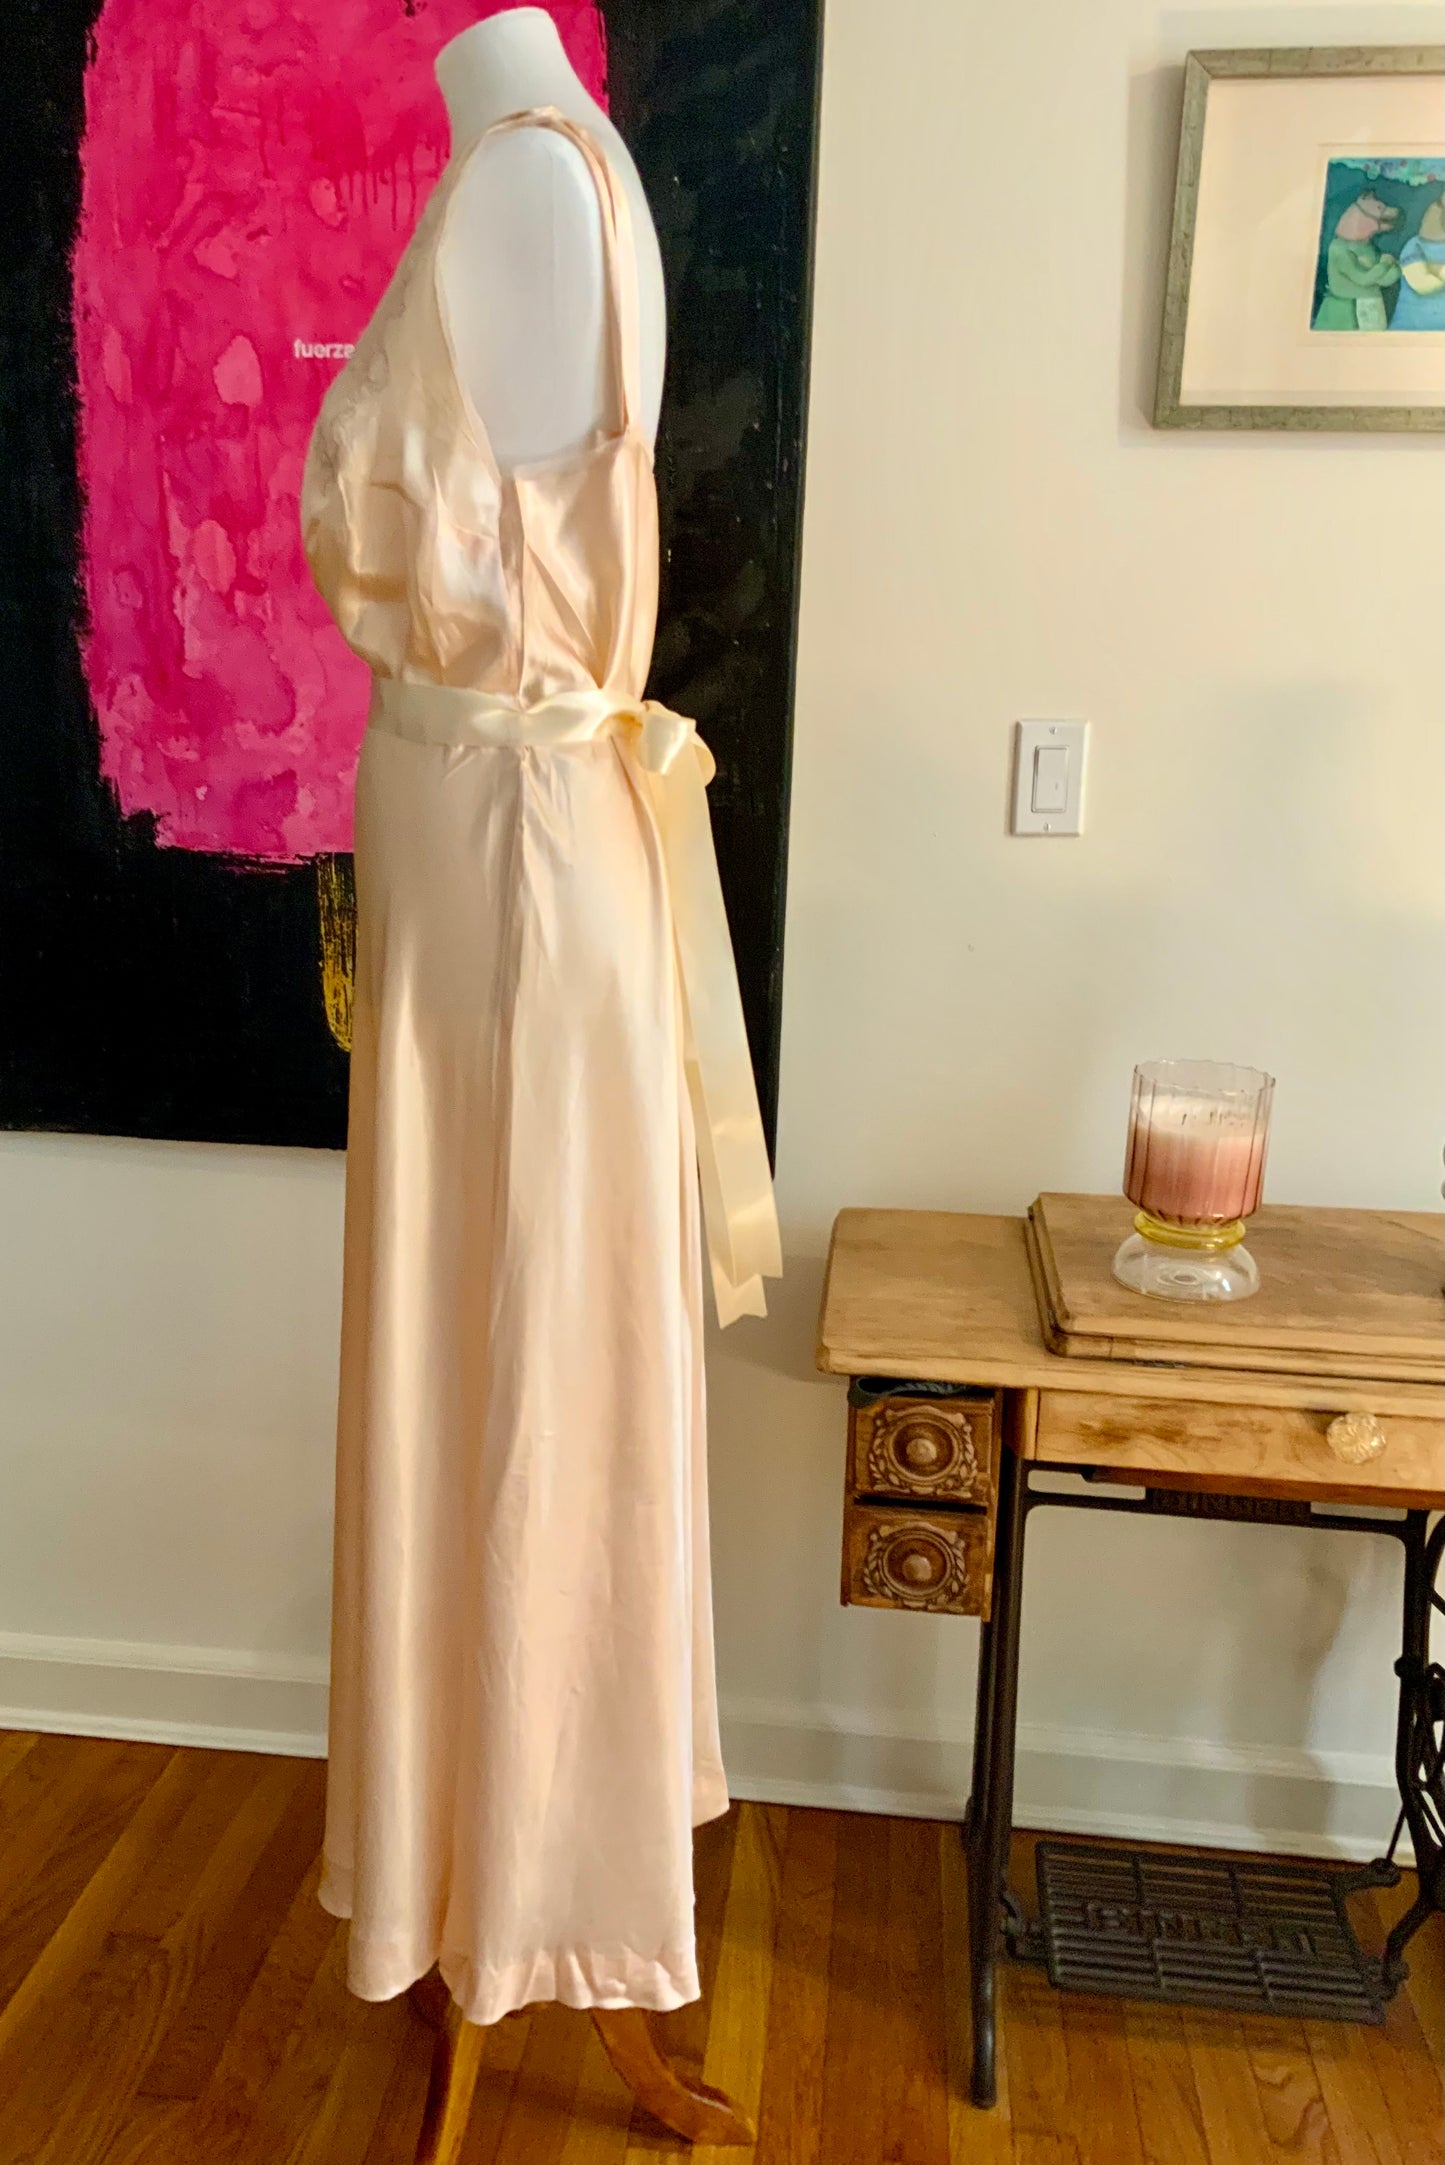 Lace Embroidered Nightgown - 40s